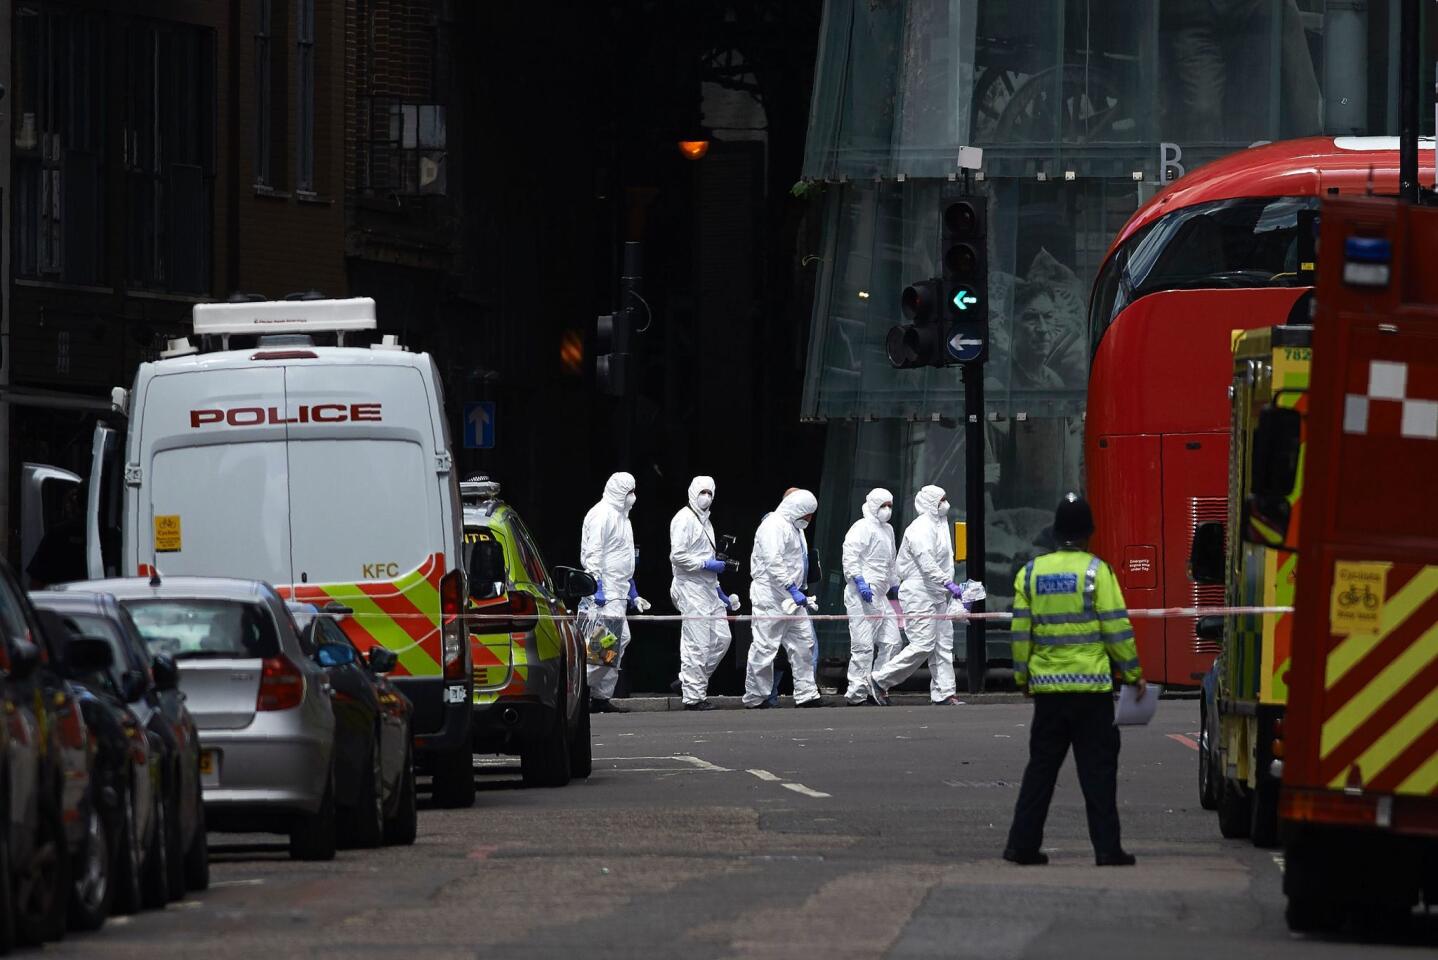 Police forensic officers work near Borough Market in London on June 4, 2017, as police continue their investigations following the June 3 terror attack.